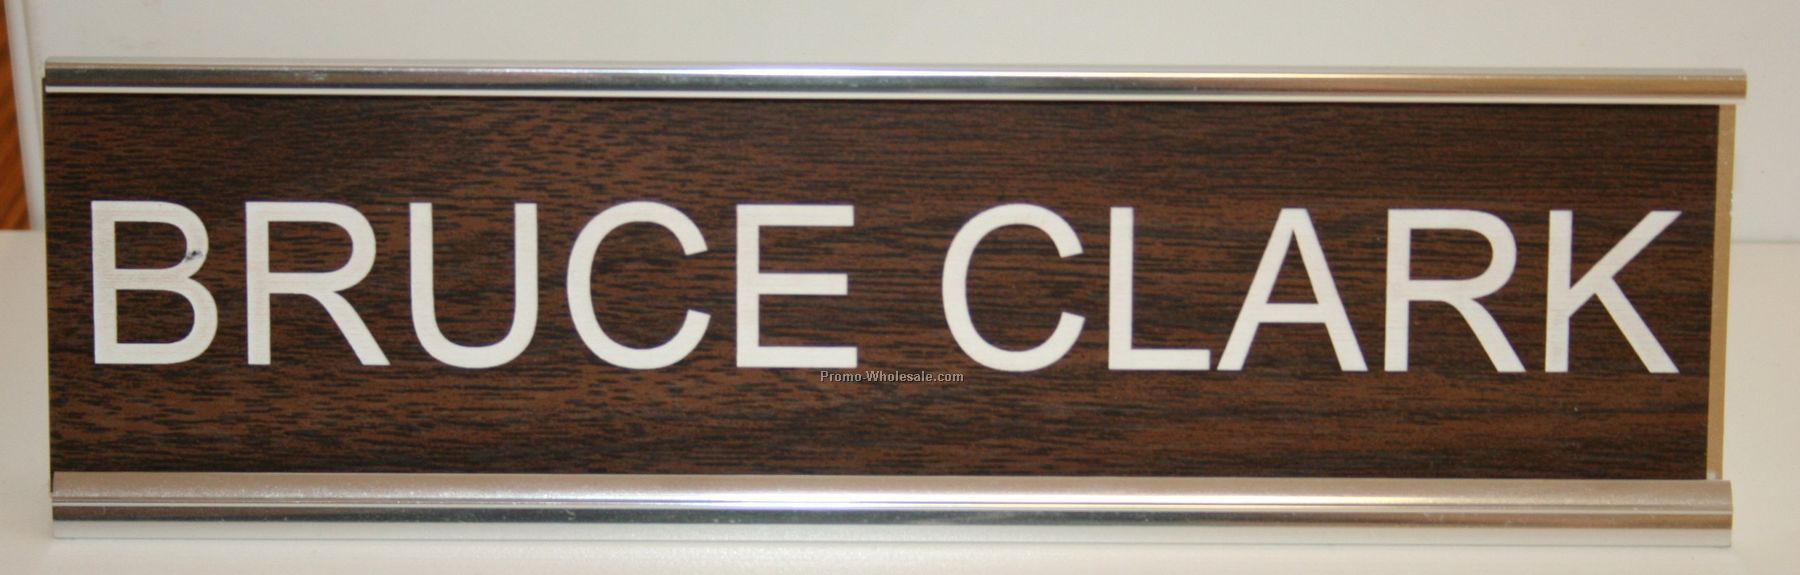 Laser Engraved Name Plate Insert 10"x2"